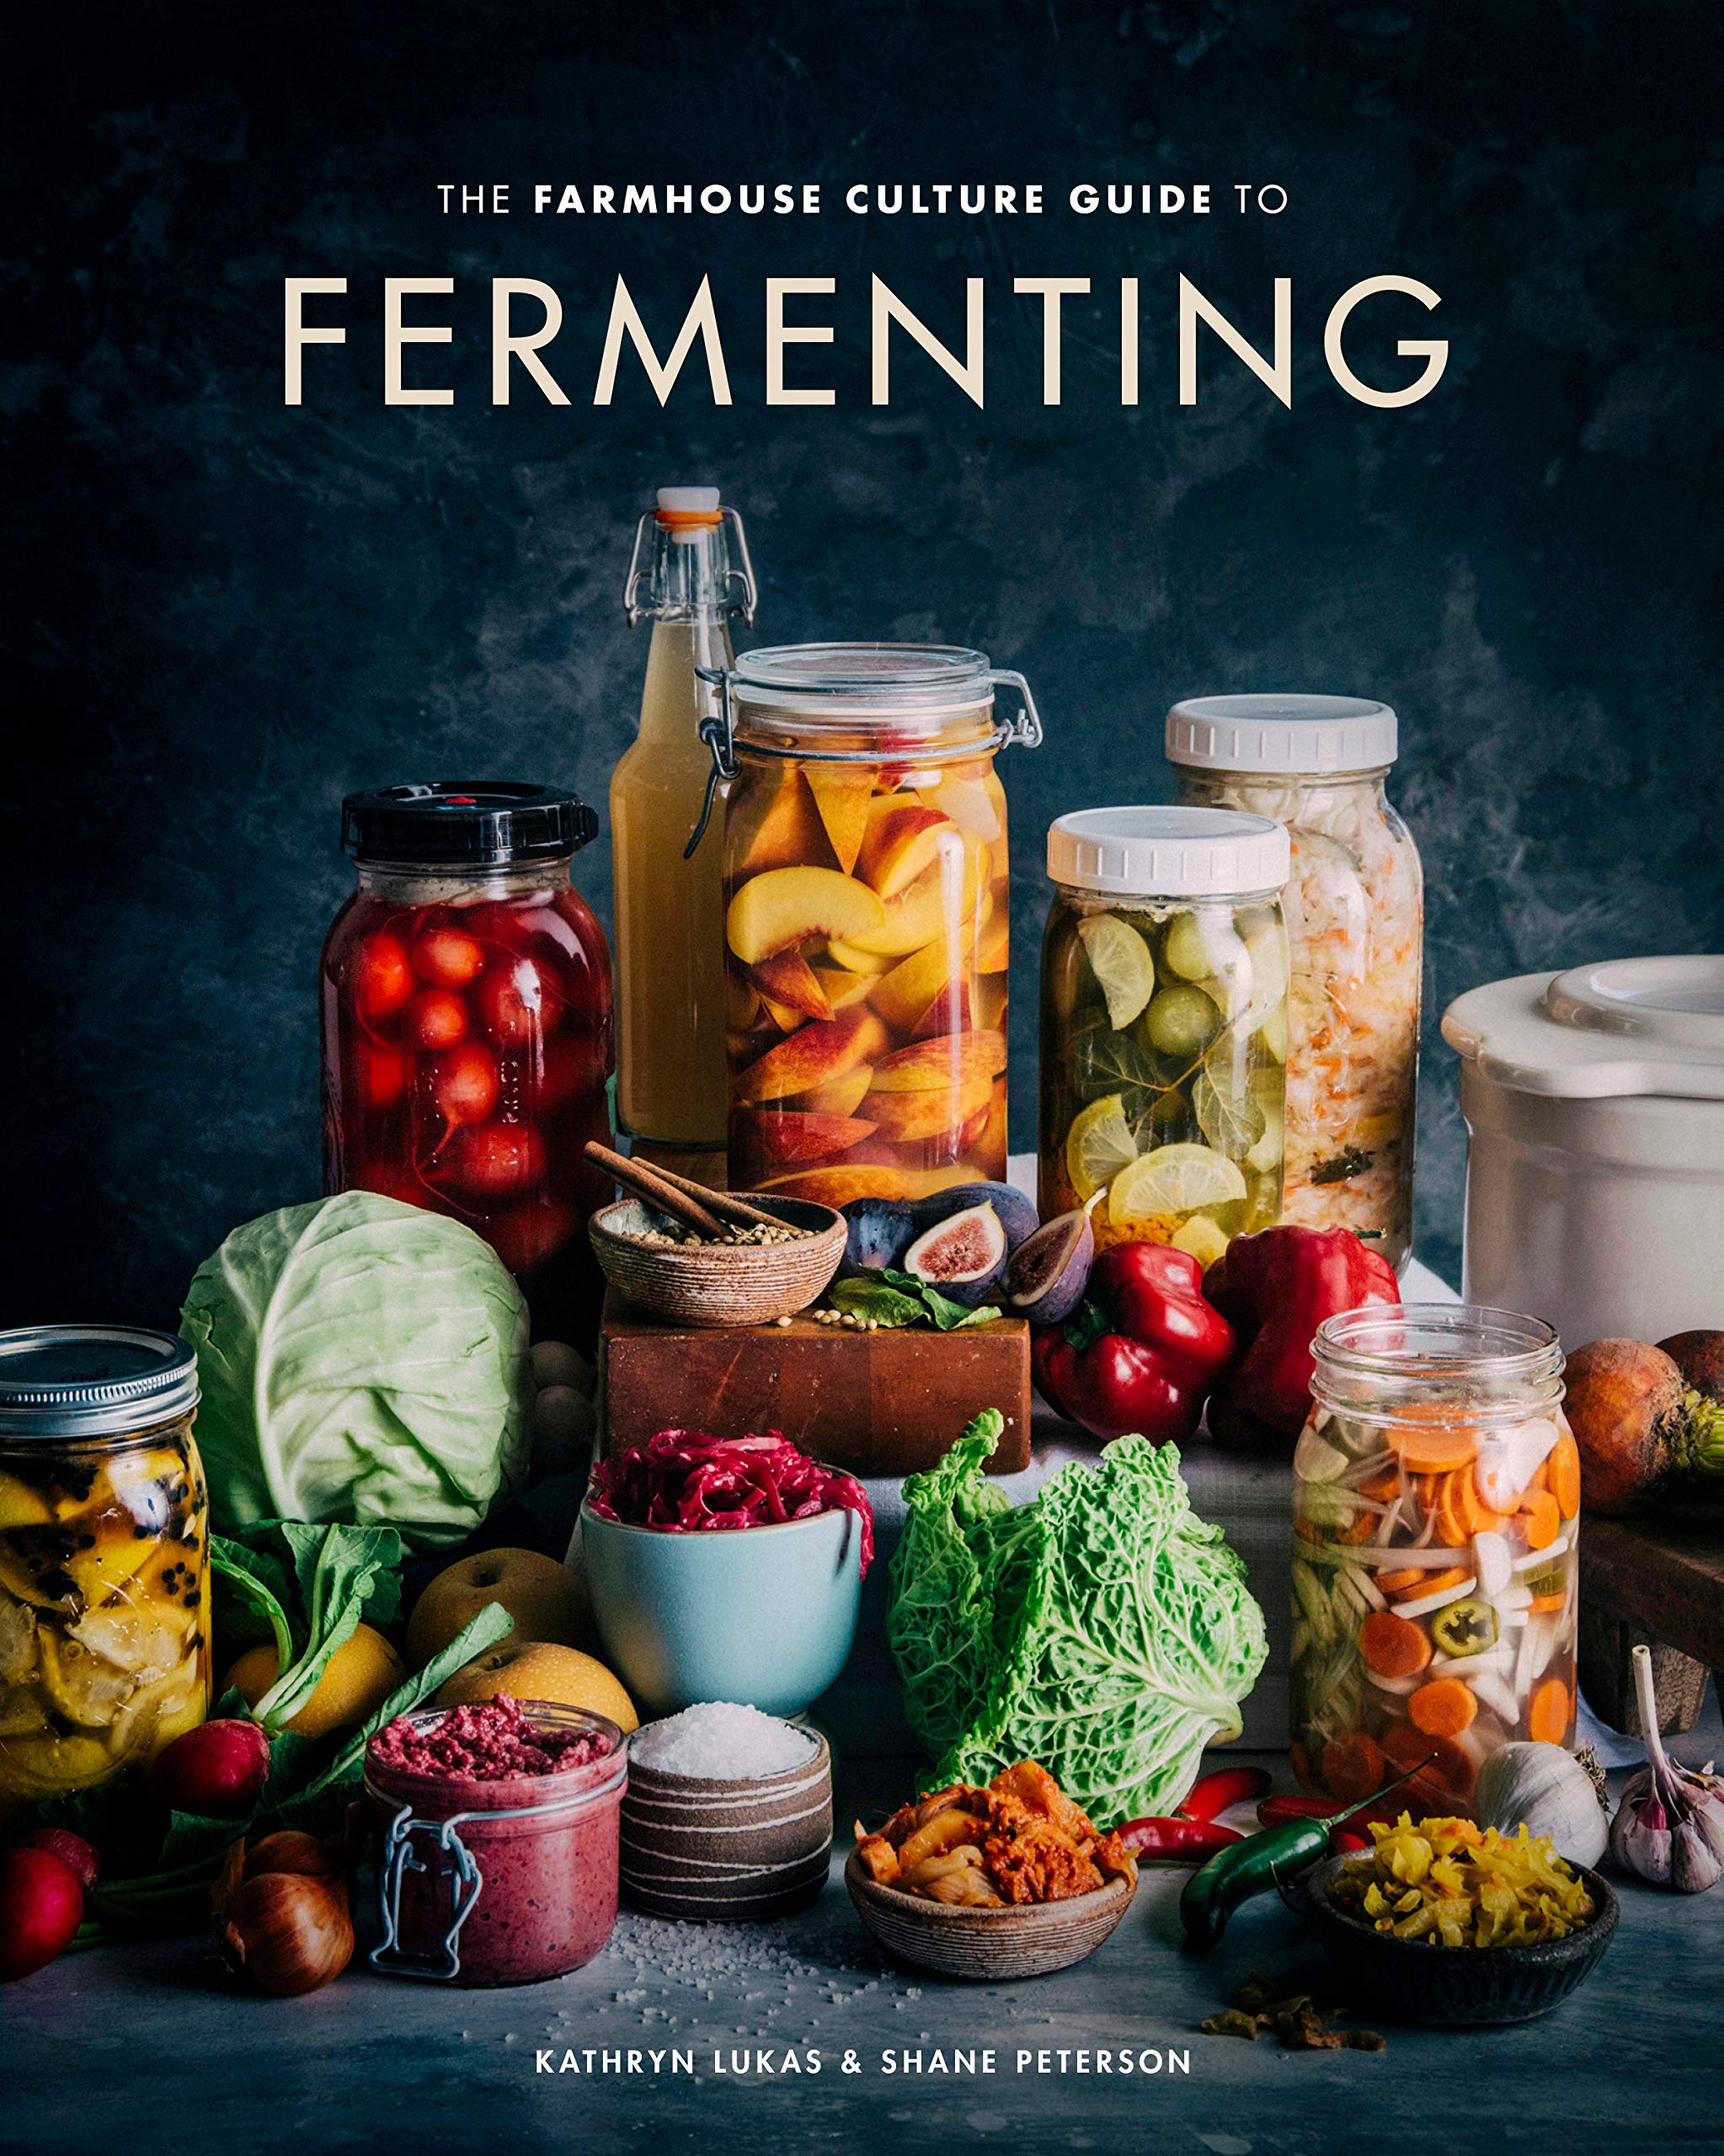 The Farmhouse Culture Guide to Fermenting: Crafting Live-Cultured Foods and Drinks with 100 Recipes from Kimchi to Kombucha (Kathryn Lukas, Shane Peterson)